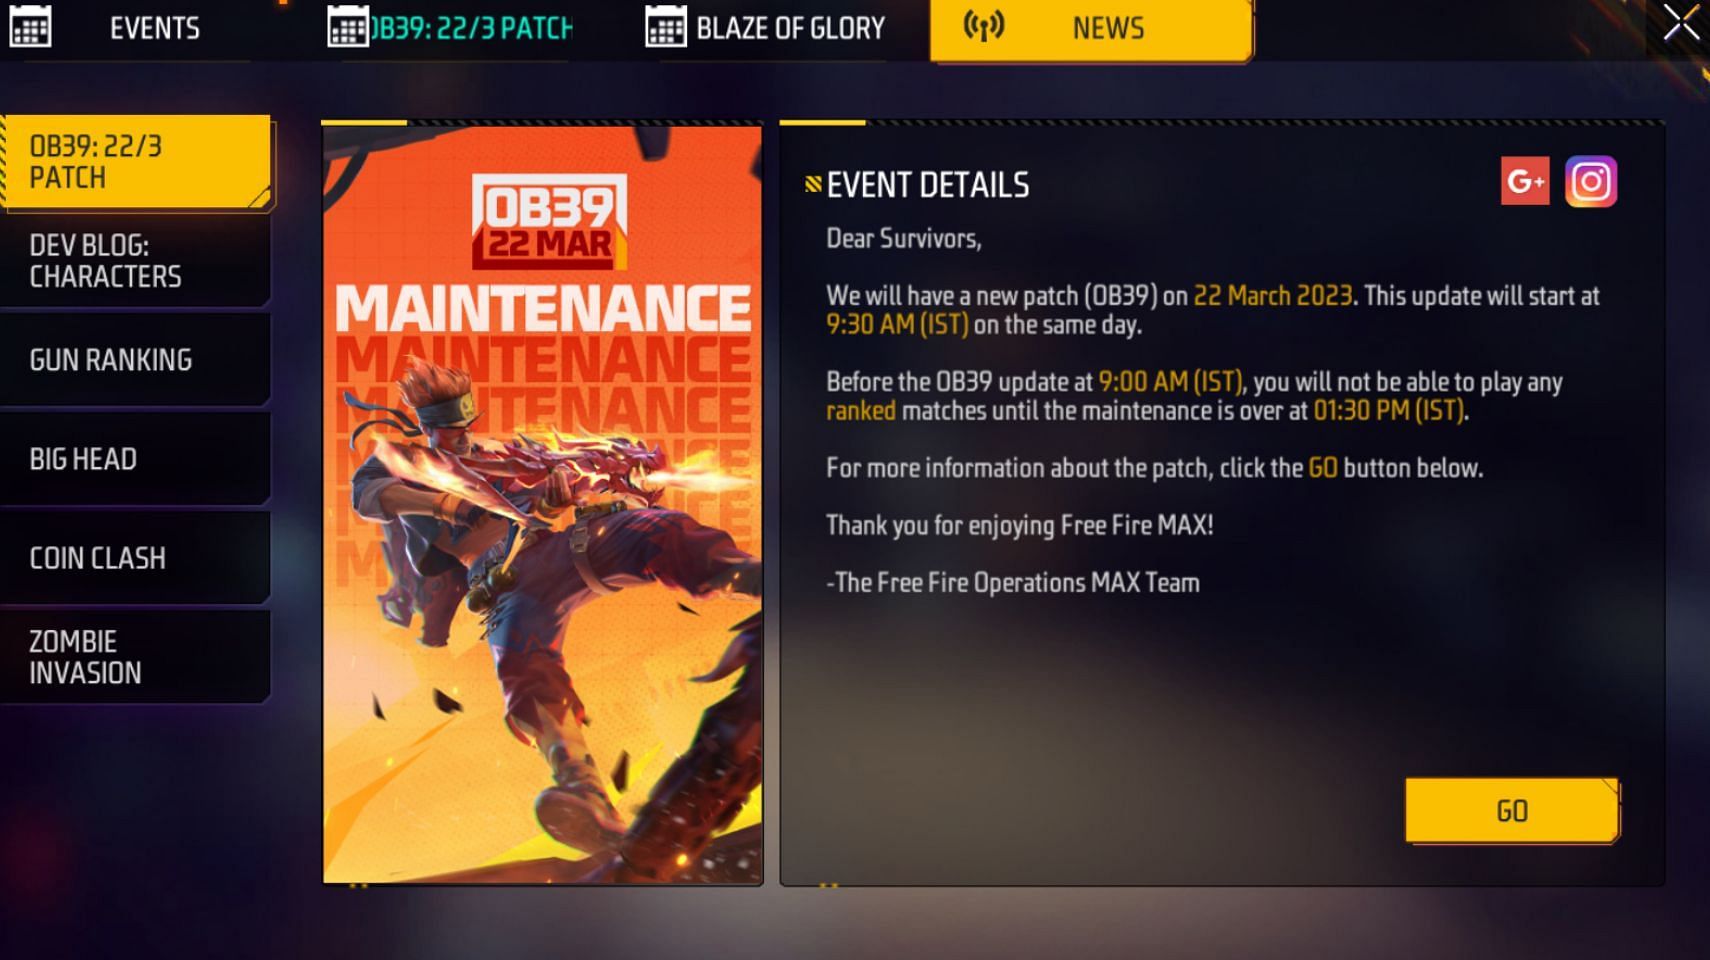 Maintenance and update schedule revealed in the game (Image via Garena)